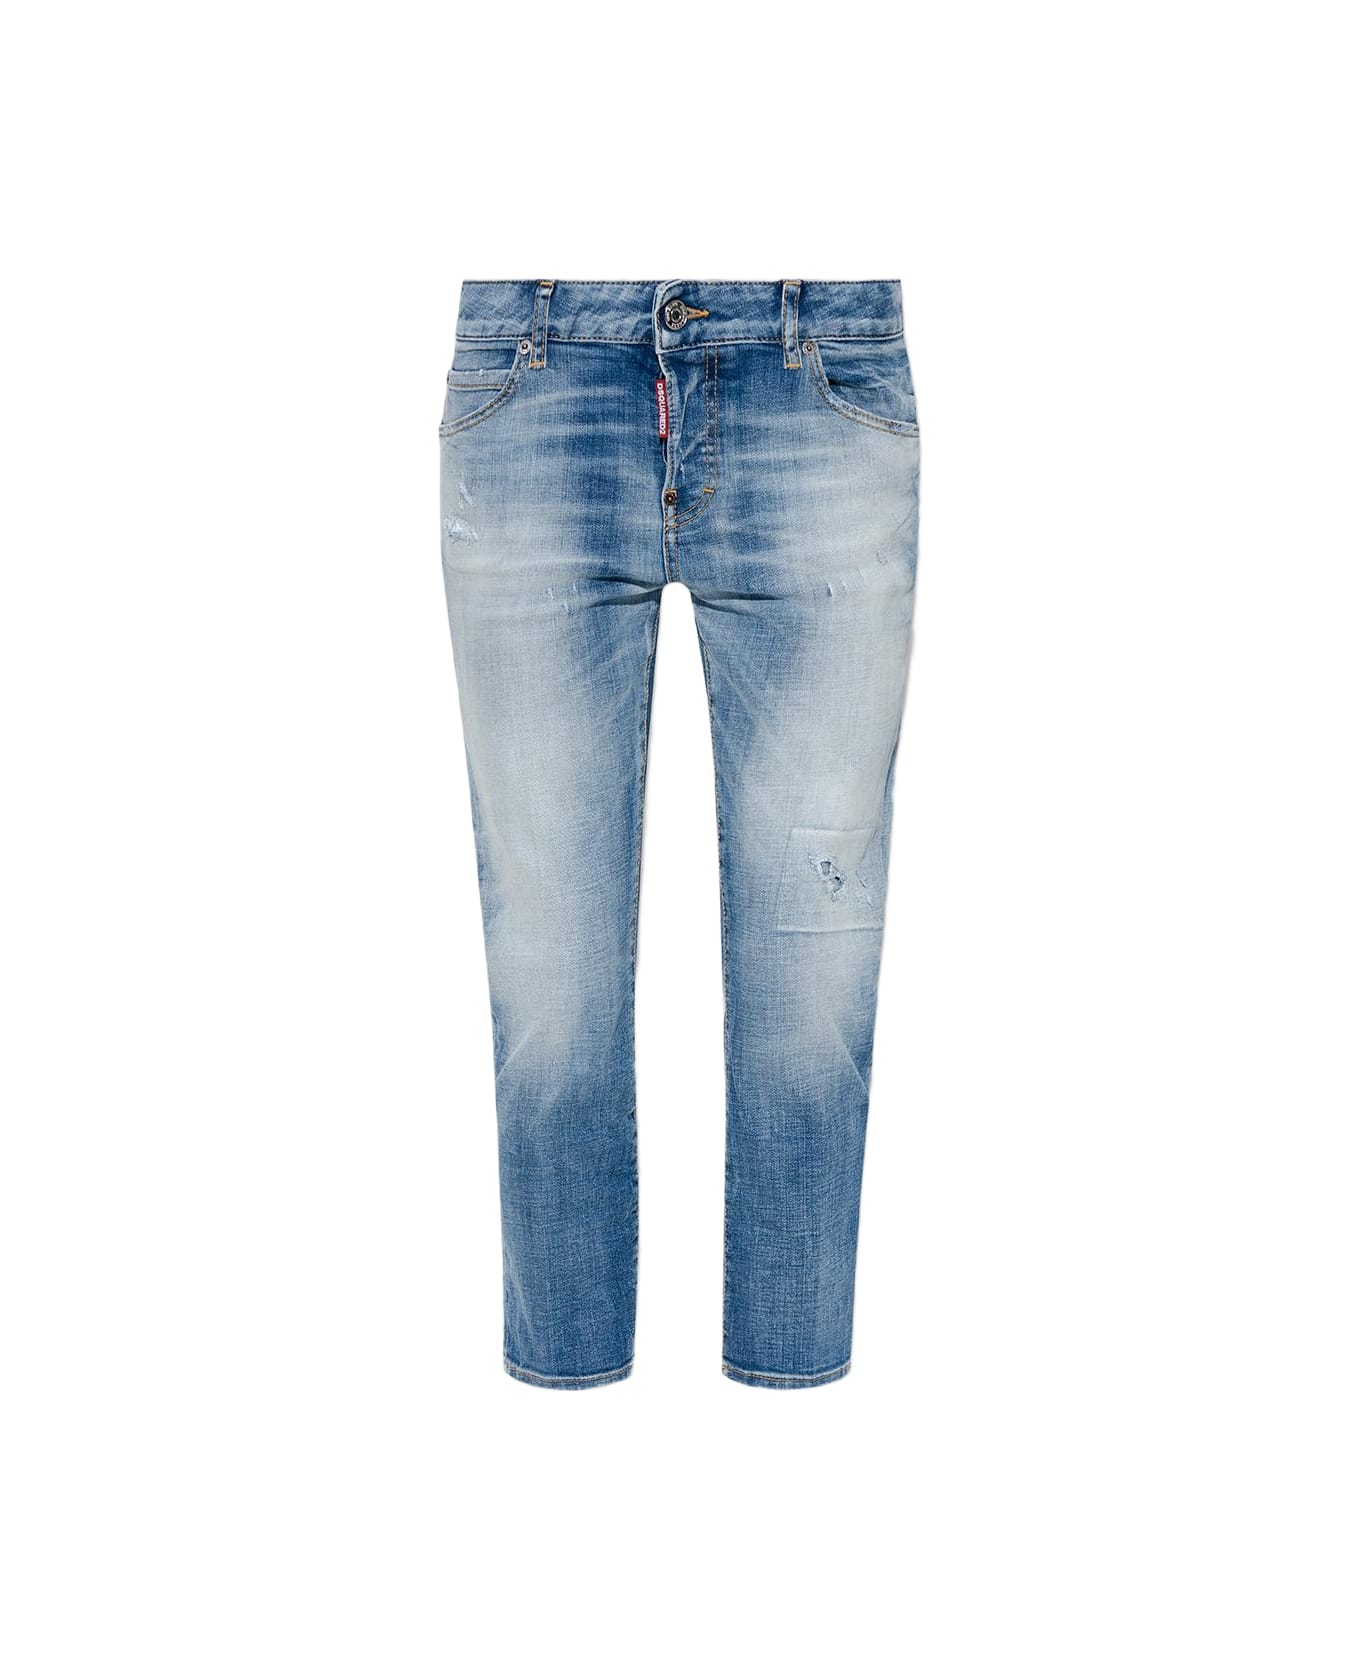 Dsquared2 'cool Girl Cropped' Jeans - Denim